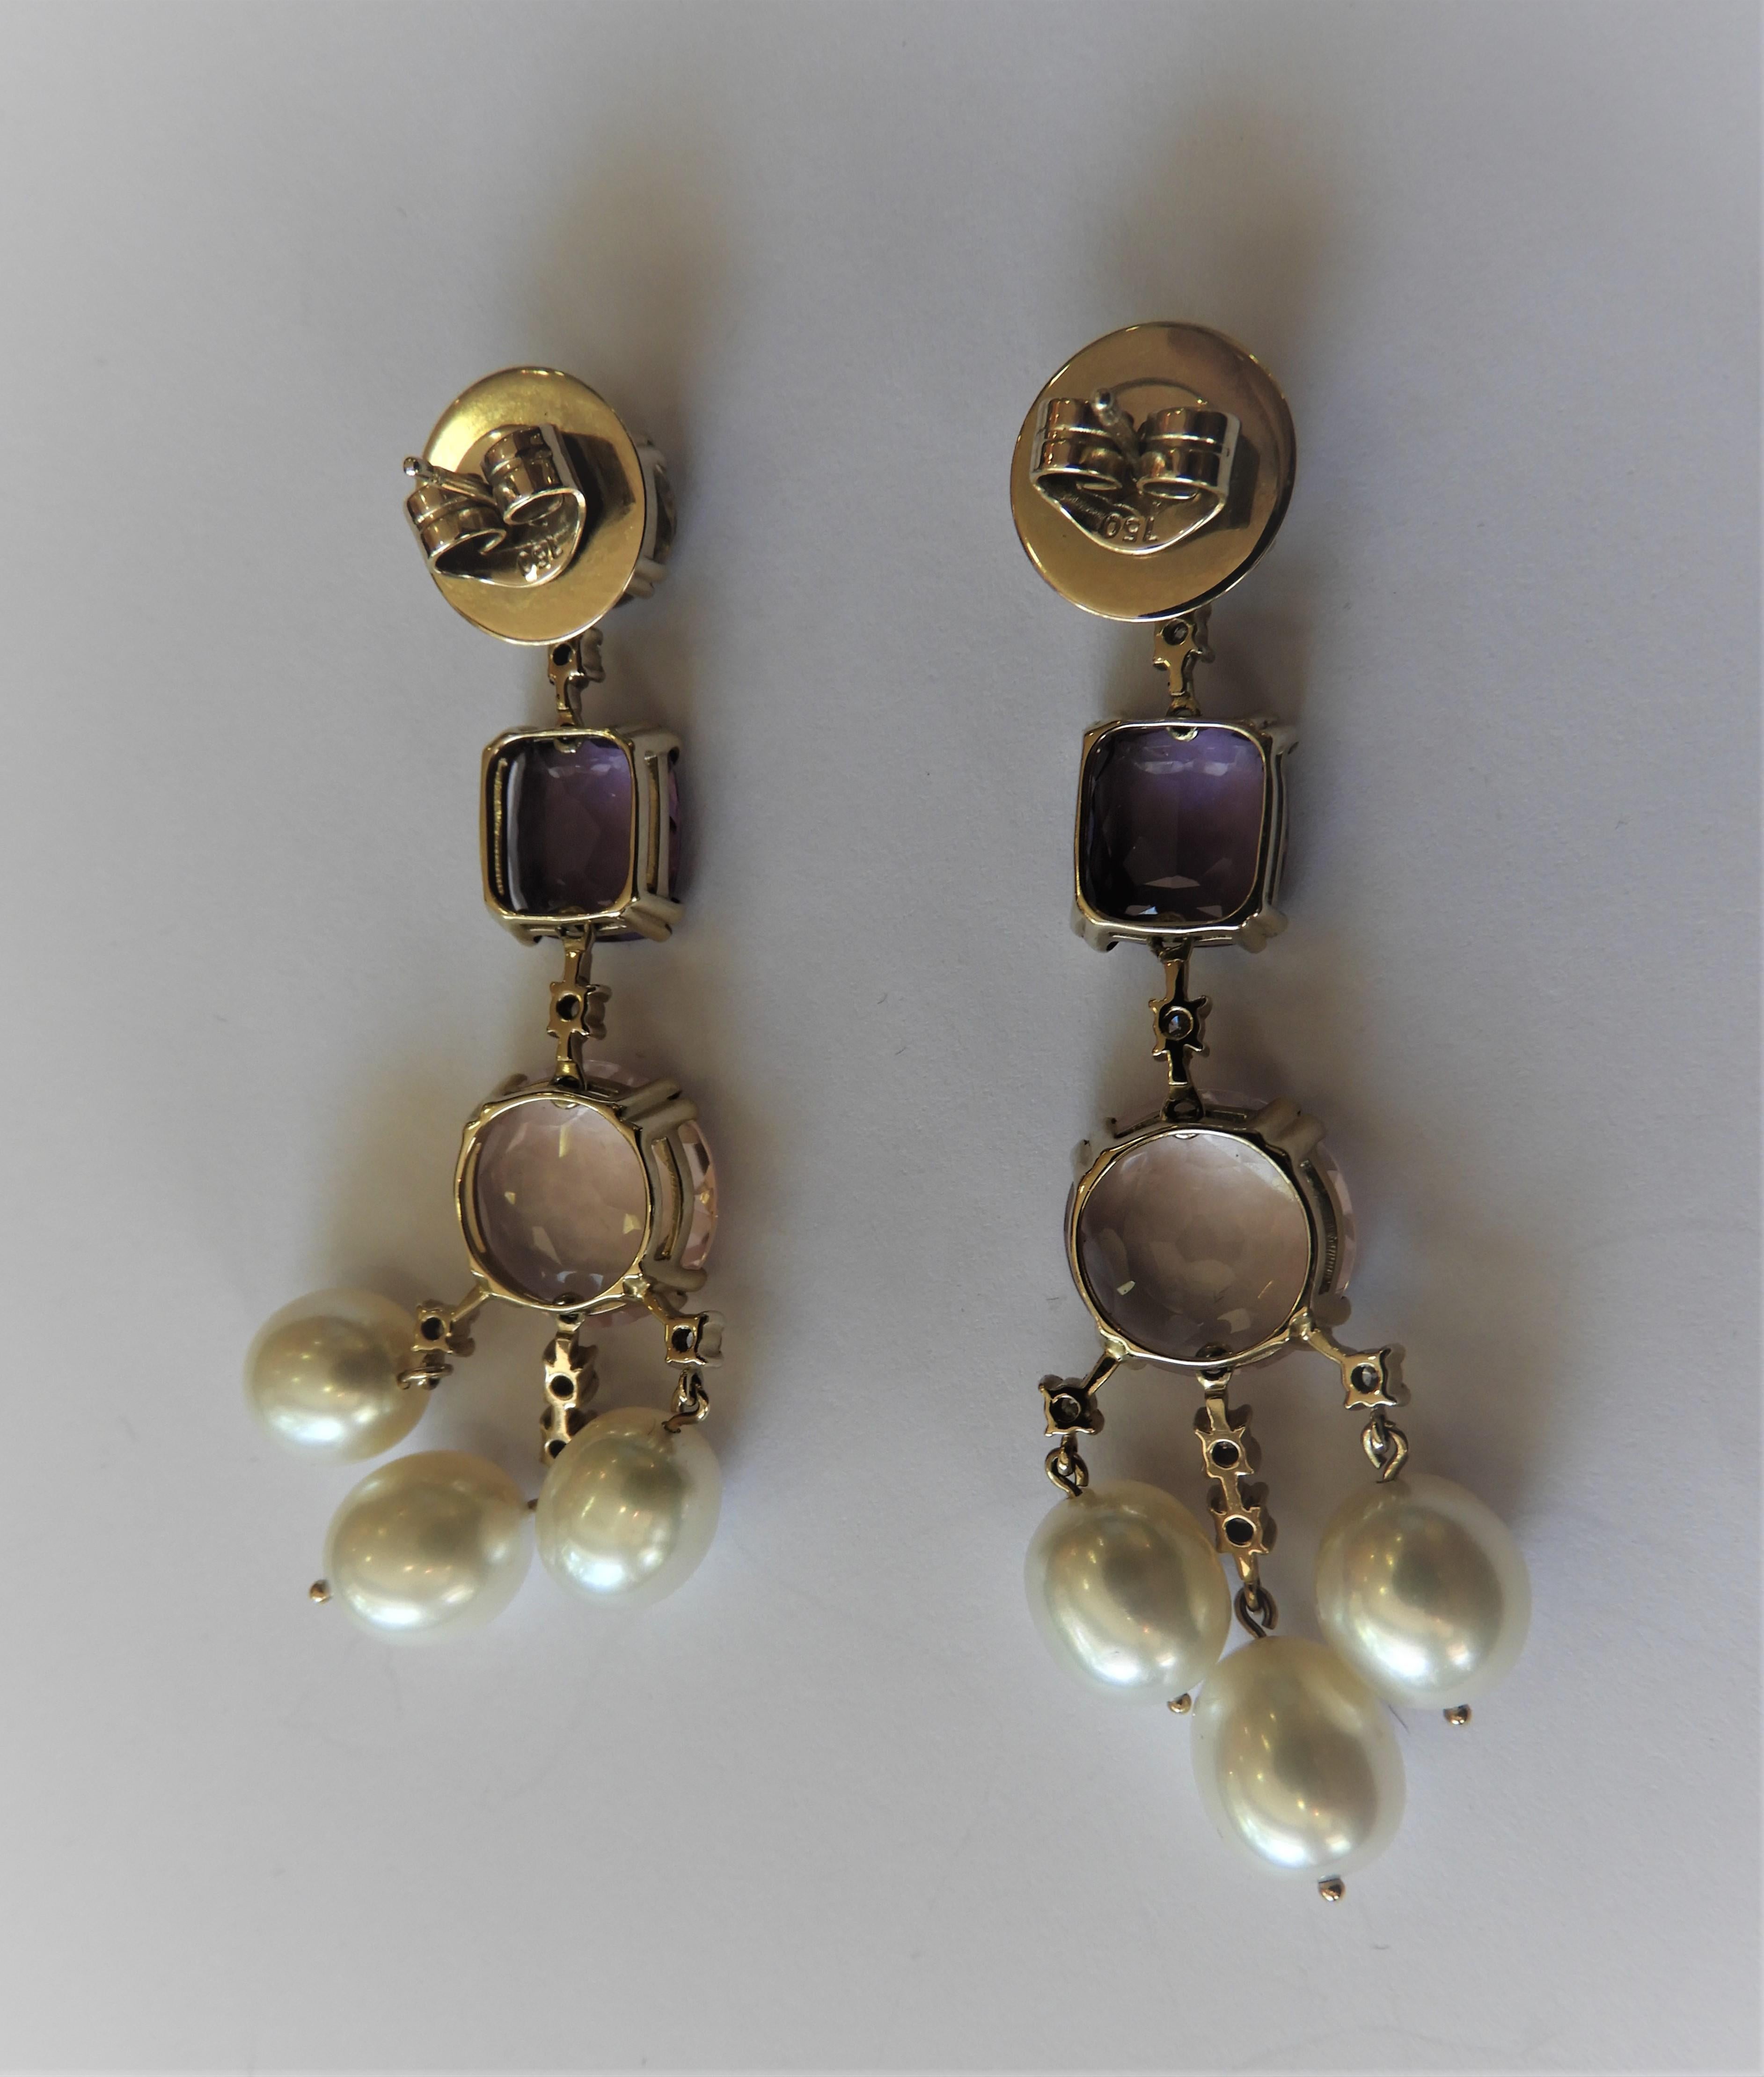 Contemporary H Stern Primavera Earrings with Coloured Gems and Cultivates Pearls